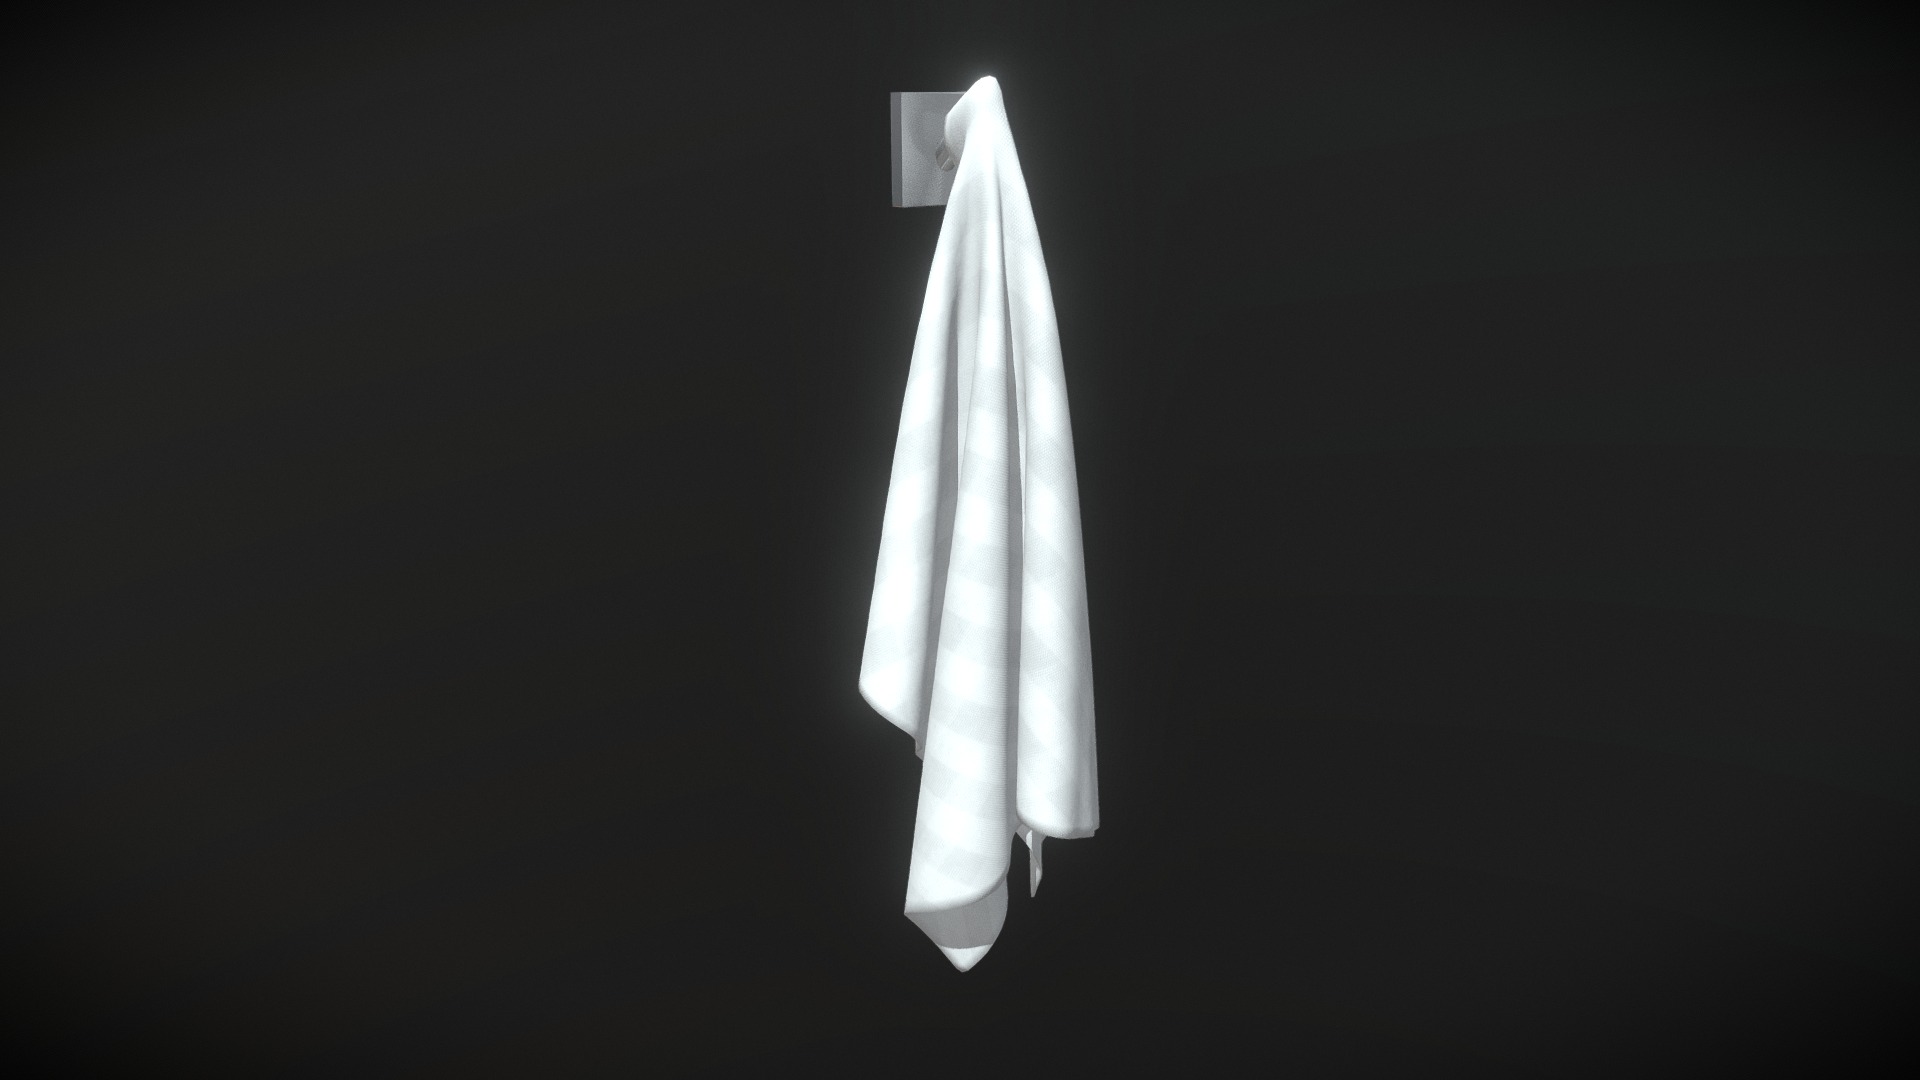 3D model Hanging Towel - This is a 3D model of the Hanging Towel. The 3D model is about a white dress on a black background.